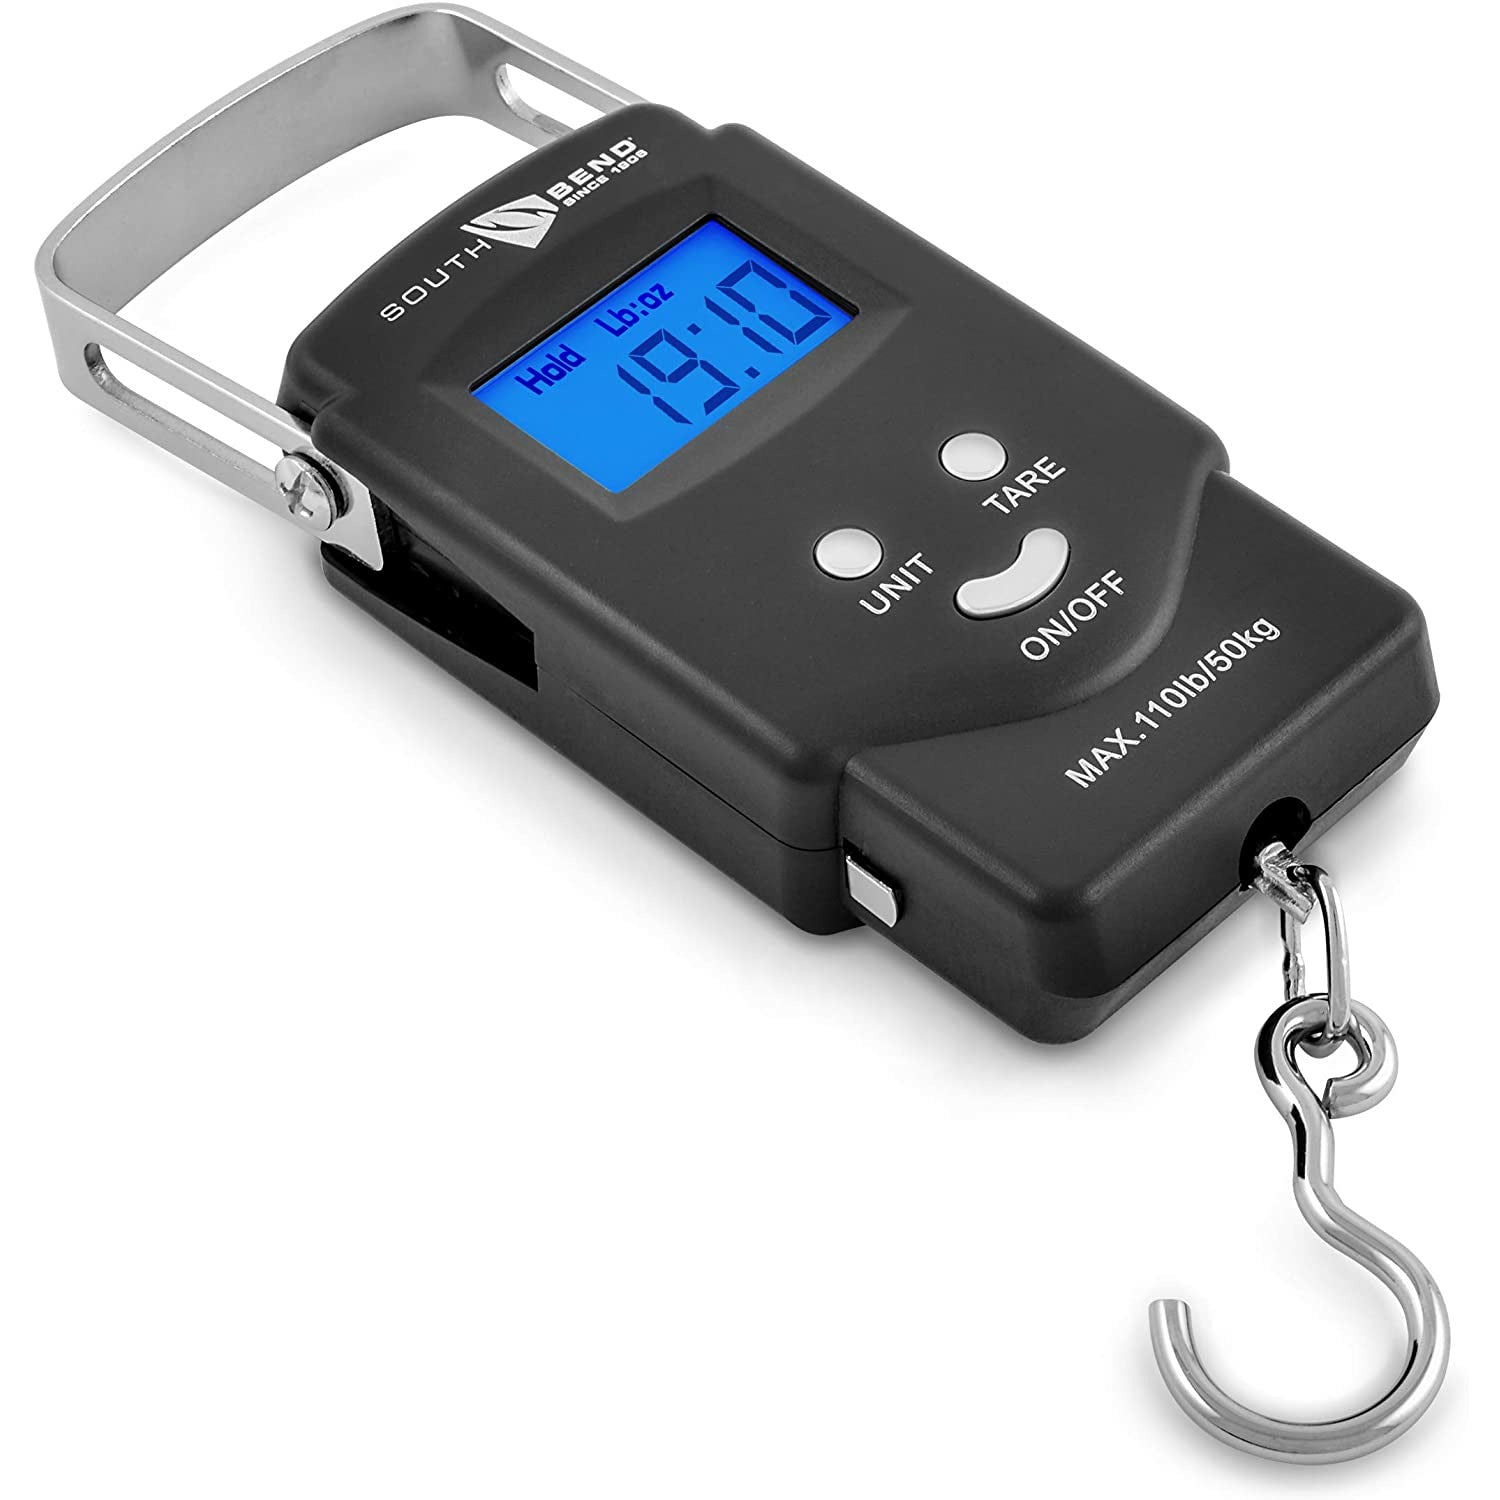 SOUTH BEND DIGITAL HANGING FISH SCALE W/ TAPE MEASURE 110 WEIGHT CAPACITY  - Copperstate Tackle